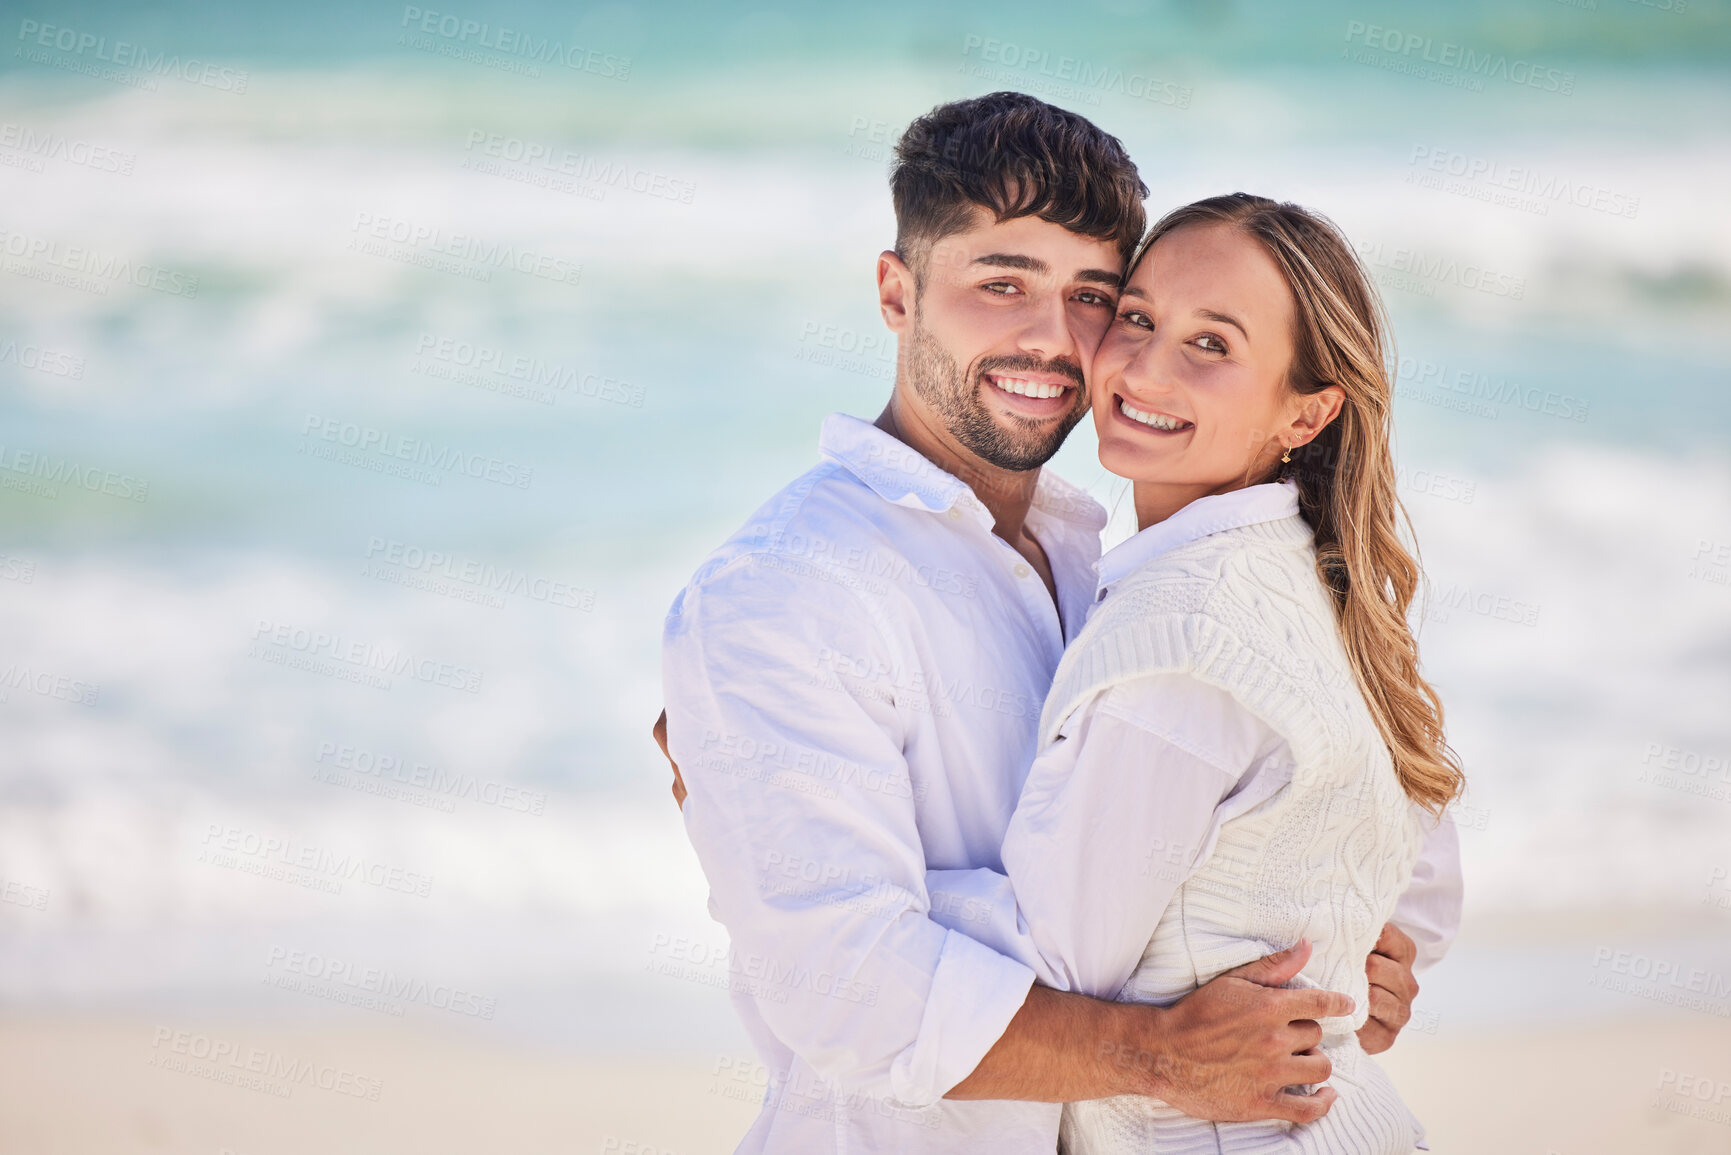 Buy stock photo Portrait, love or couple hug at beach on holiday vacation or romantic honeymoon to celebrate marriage commitment. Travel, trust or woman bonding or hugging a happy partner in fun summer romance 